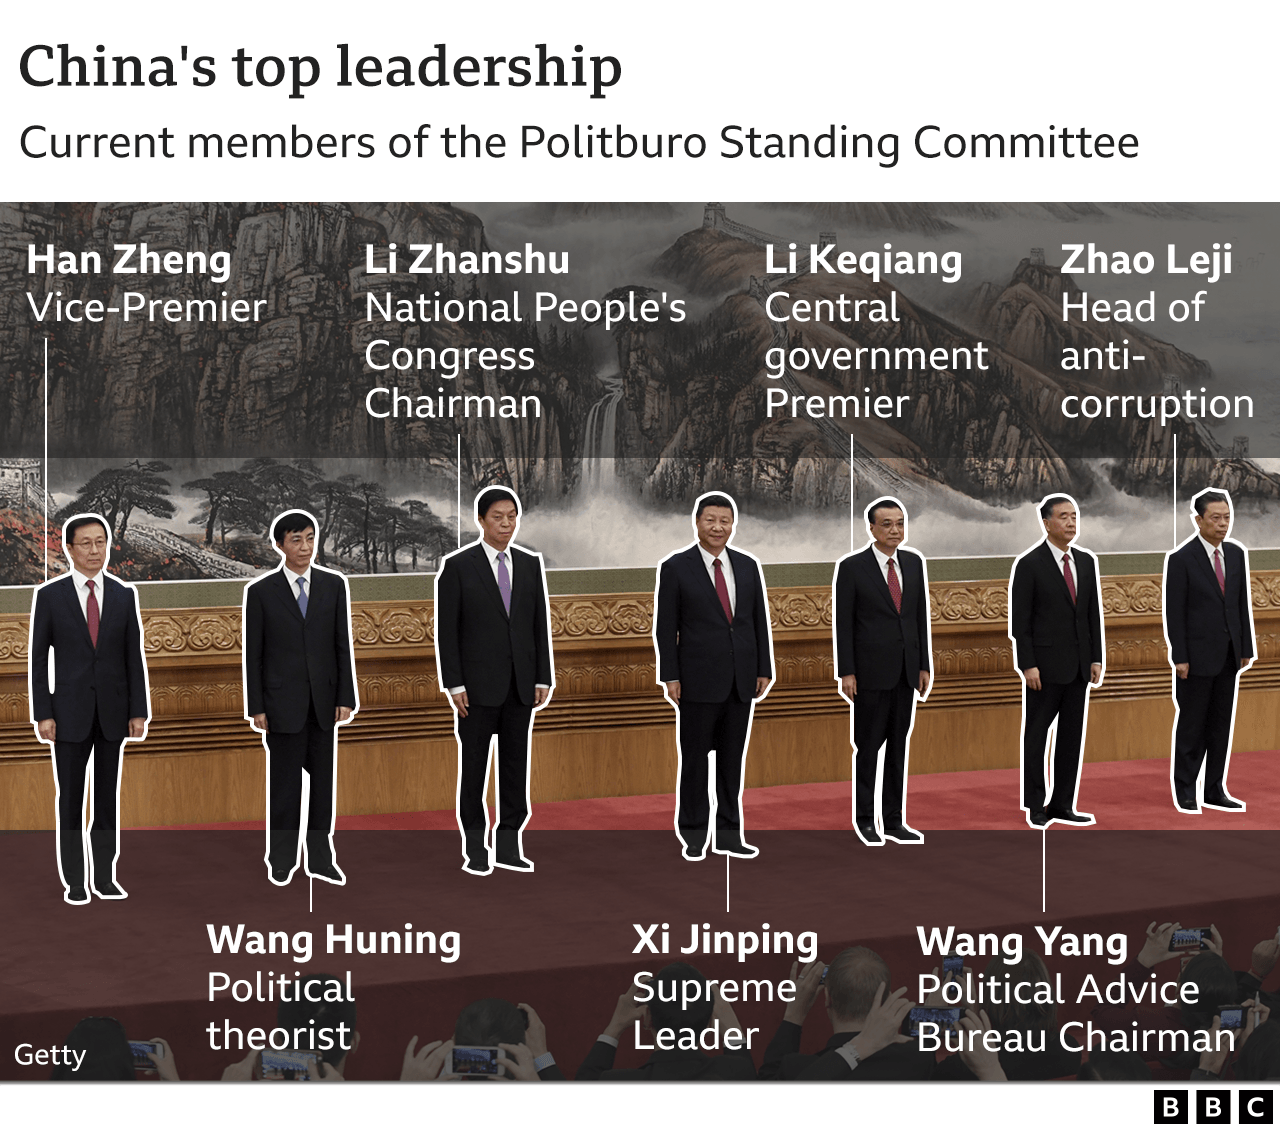 China's top leadership. Updated 12 Oct.